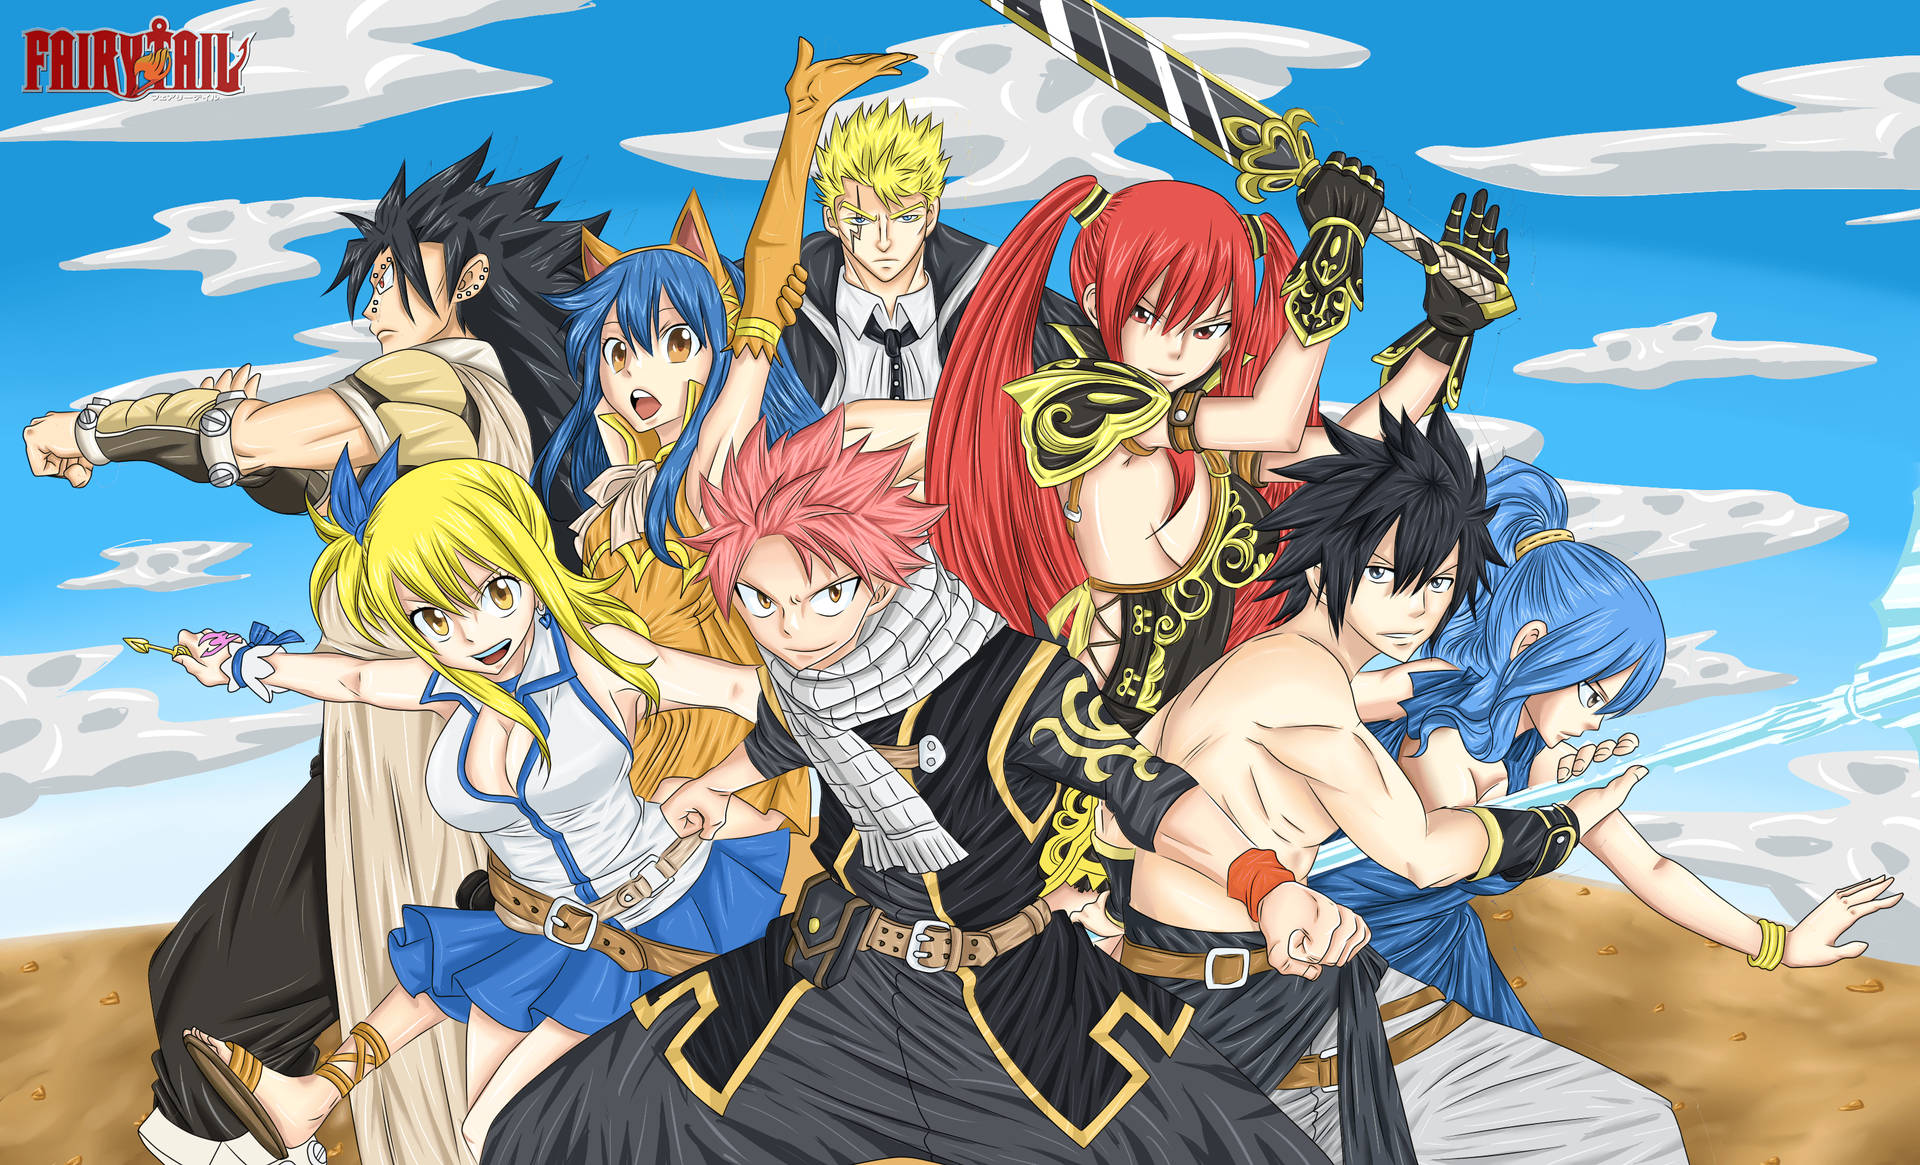 200+] Fairy Tail Wallpapers | Wallpapers.com